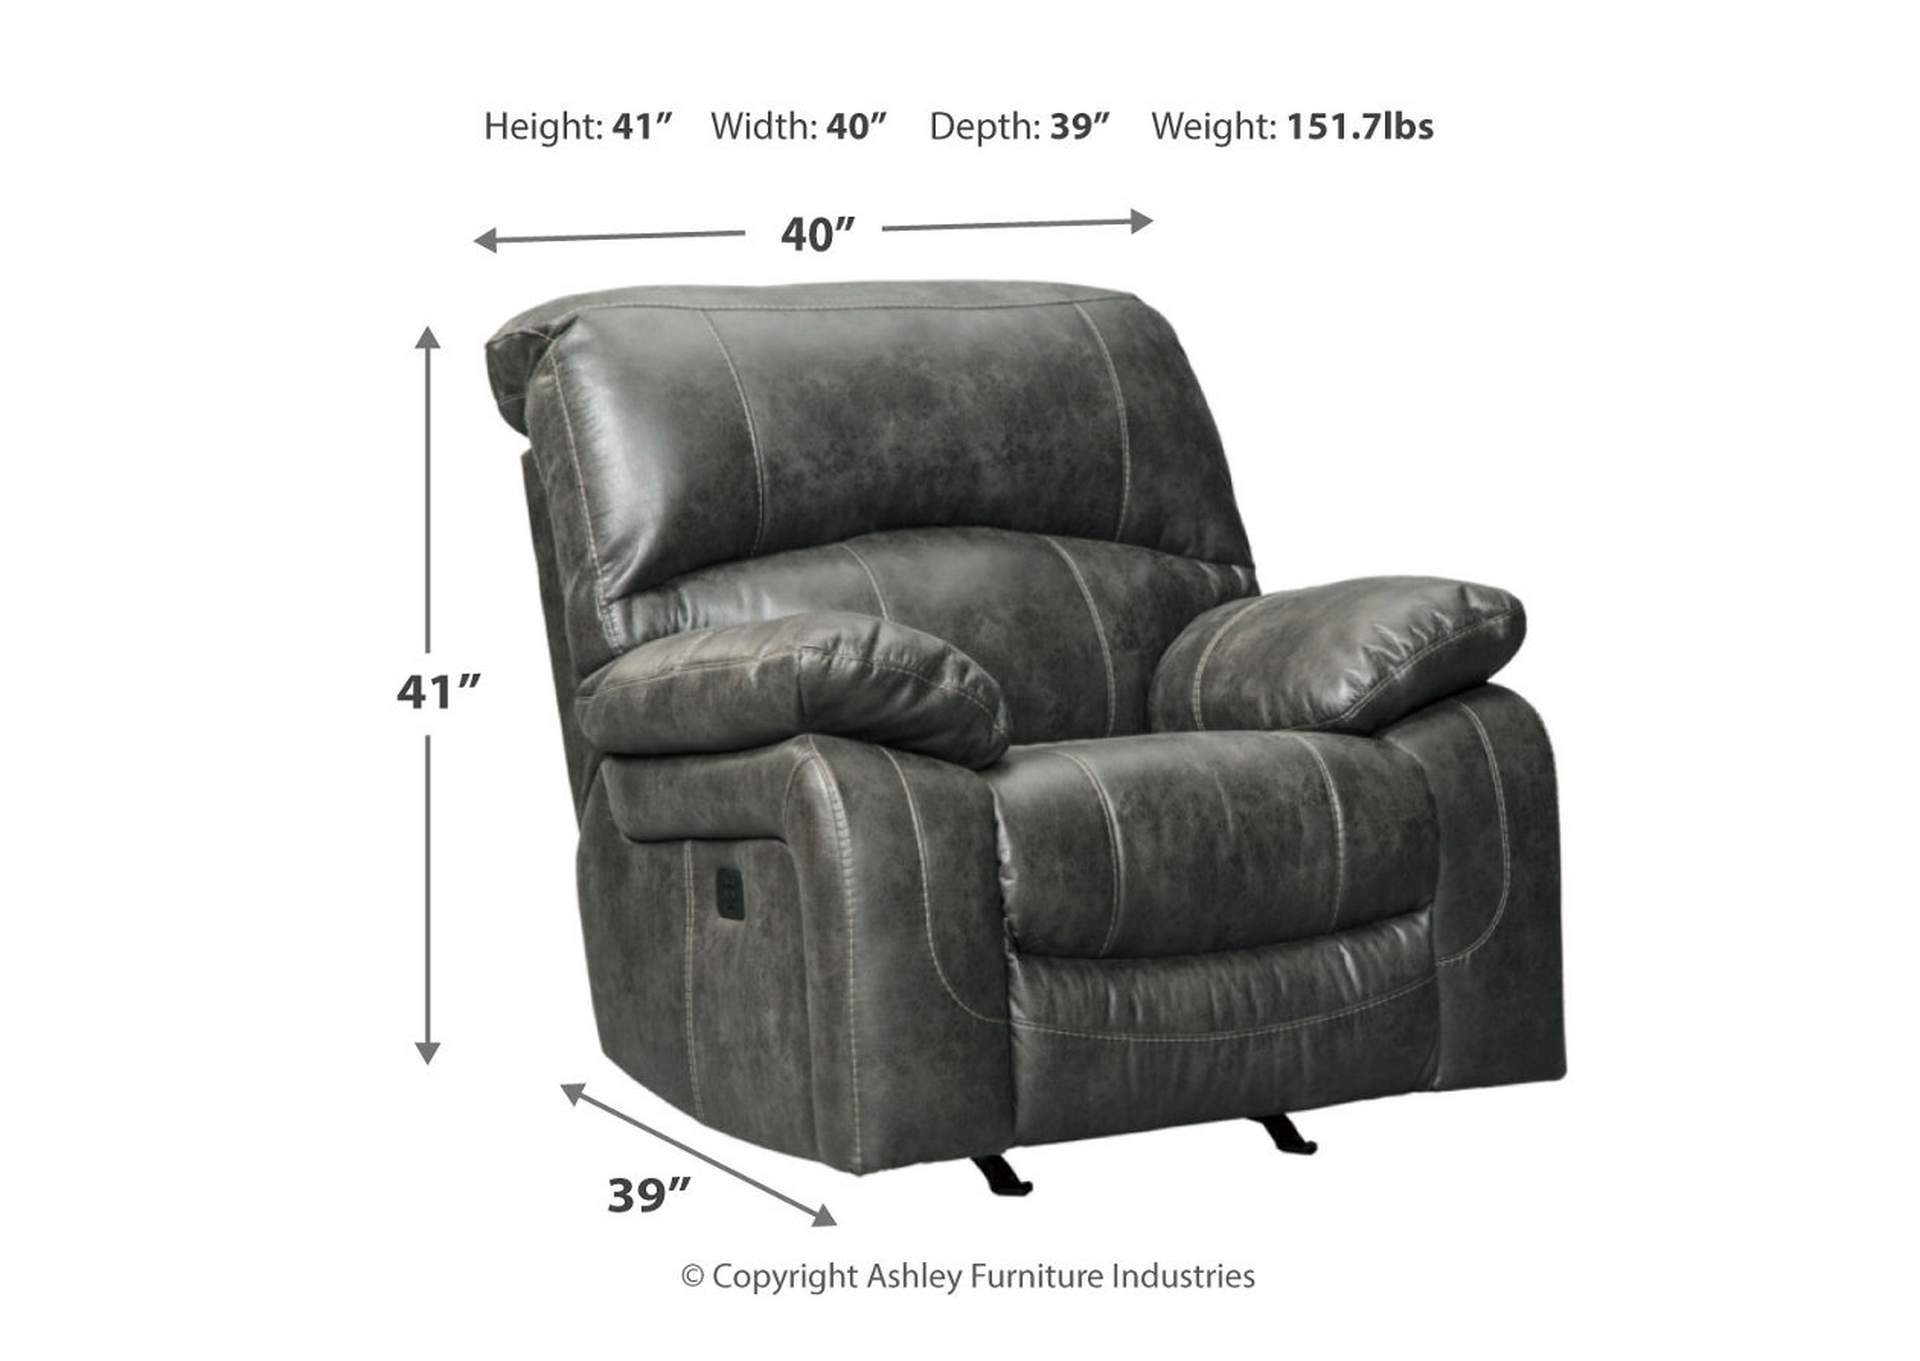 Dunwell Power Recliner,Signature Design By Ashley